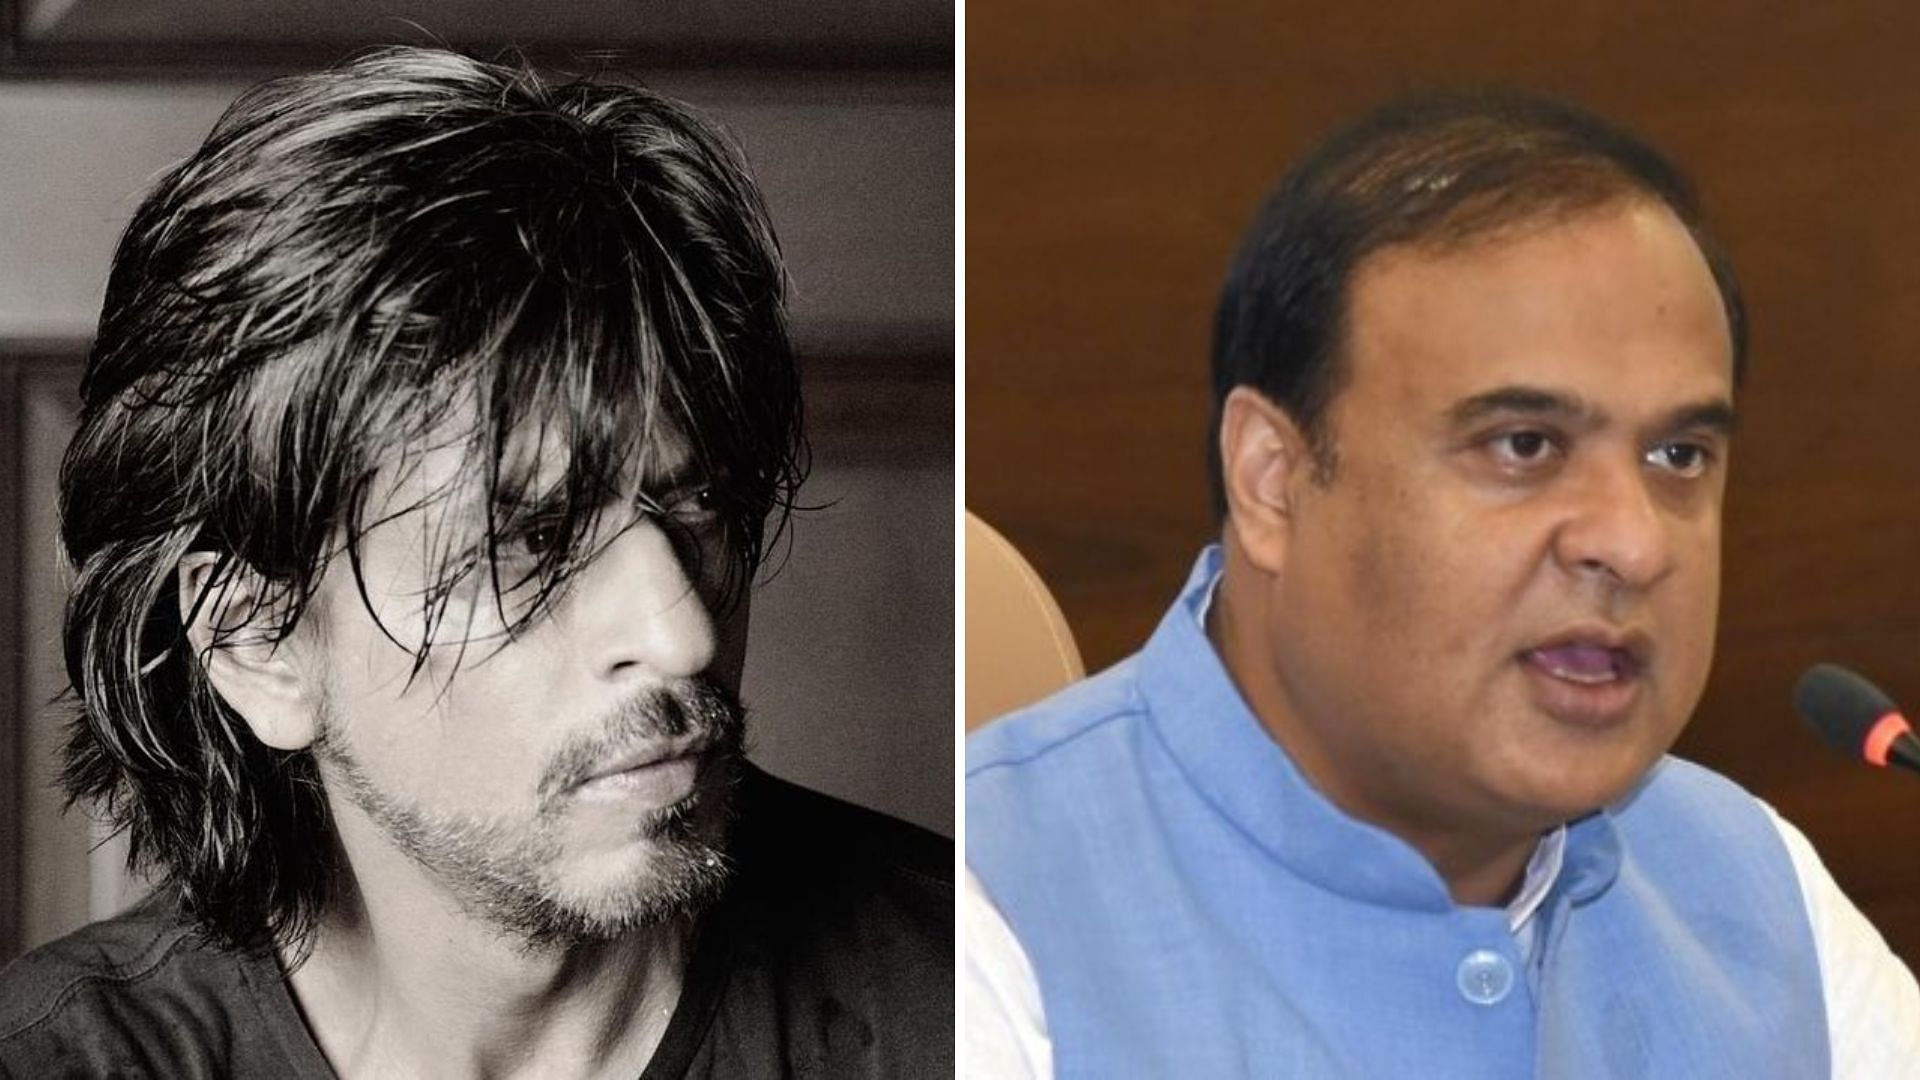 <div class="paragraphs"><p>Assam Chief Minister Himanta Biswa Sarma said Shah Rukh Khan&nbsp;expressed concern about an incident in Guwahati during screening of his film <em>Pathaan</em>.</p></div>